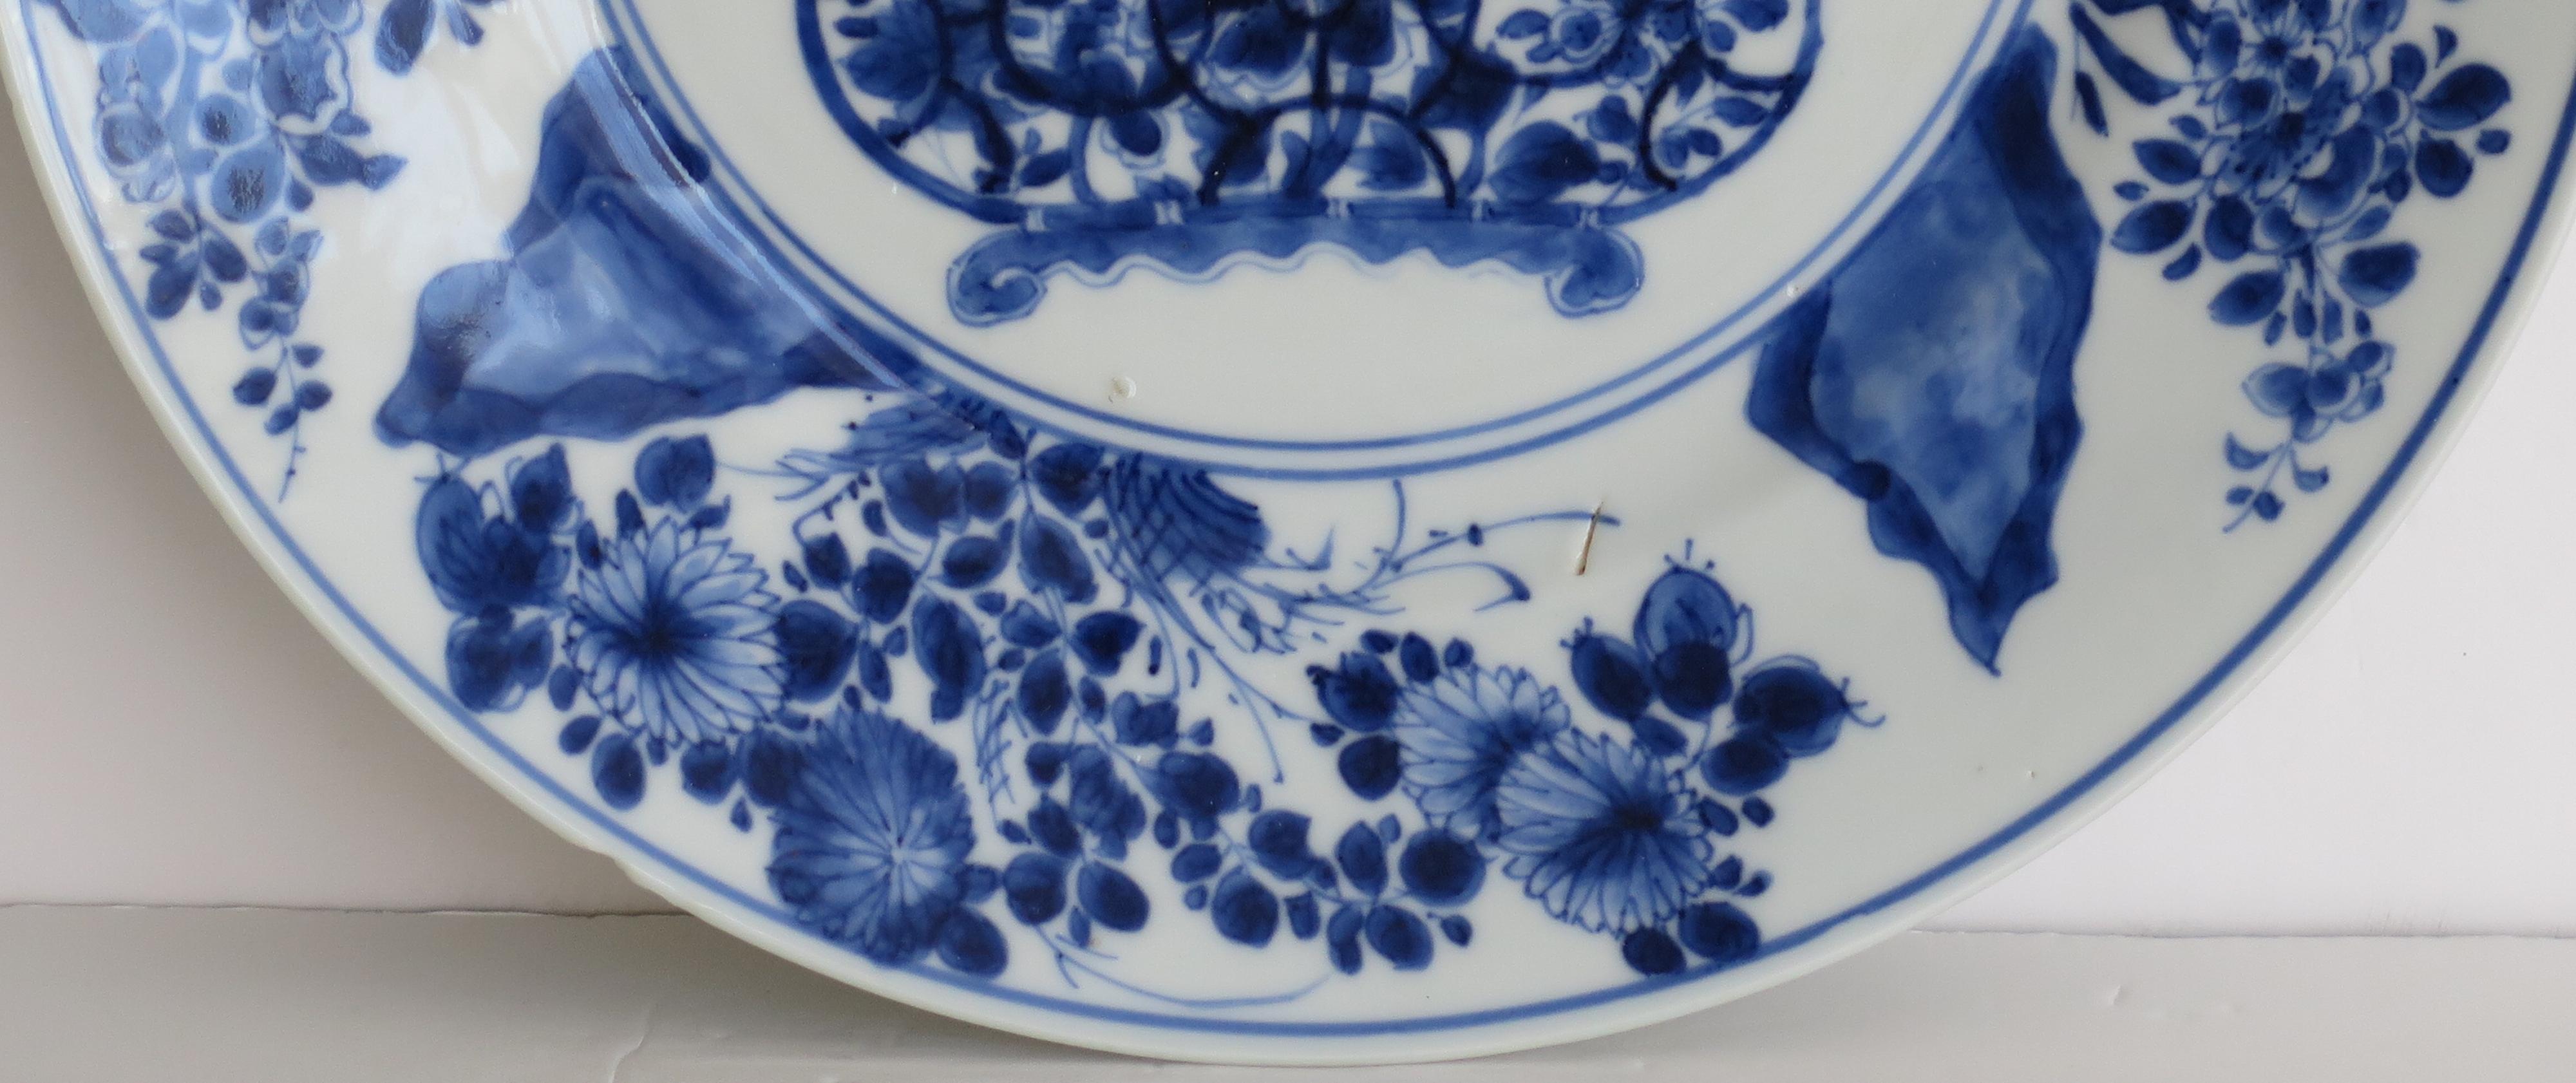 17th Century Kangxi Marked Chinese Large Plate Porcelain Blue & White Flower Bask, circa 1700 For Sale